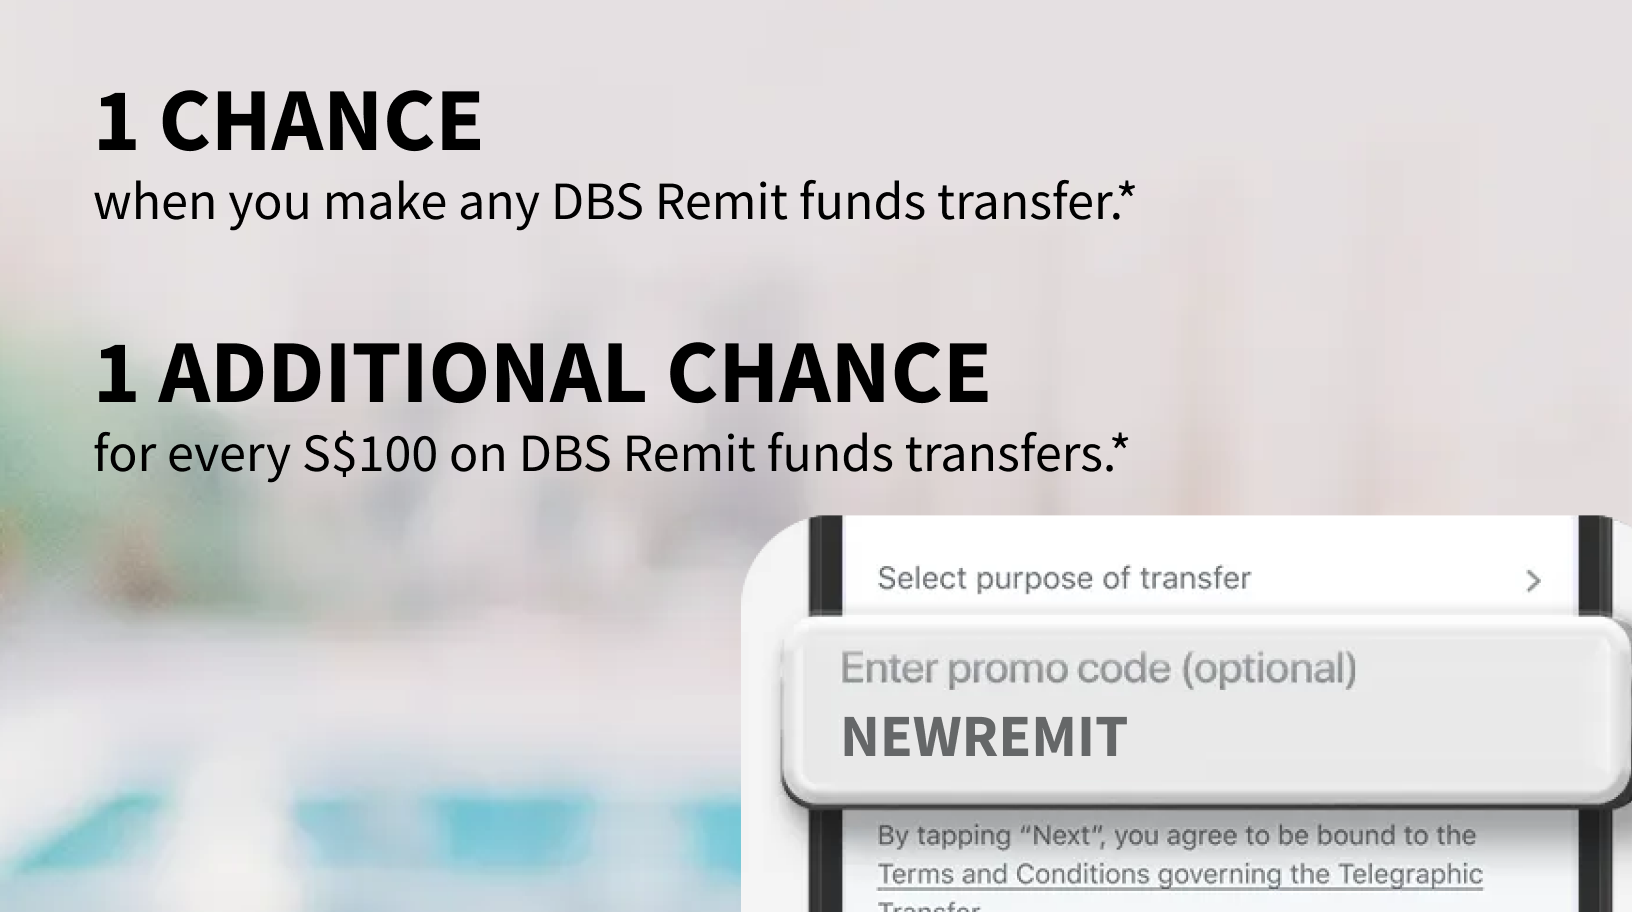 Send funds safely across the world with $0 fee & same-day transfers on DBS Remit